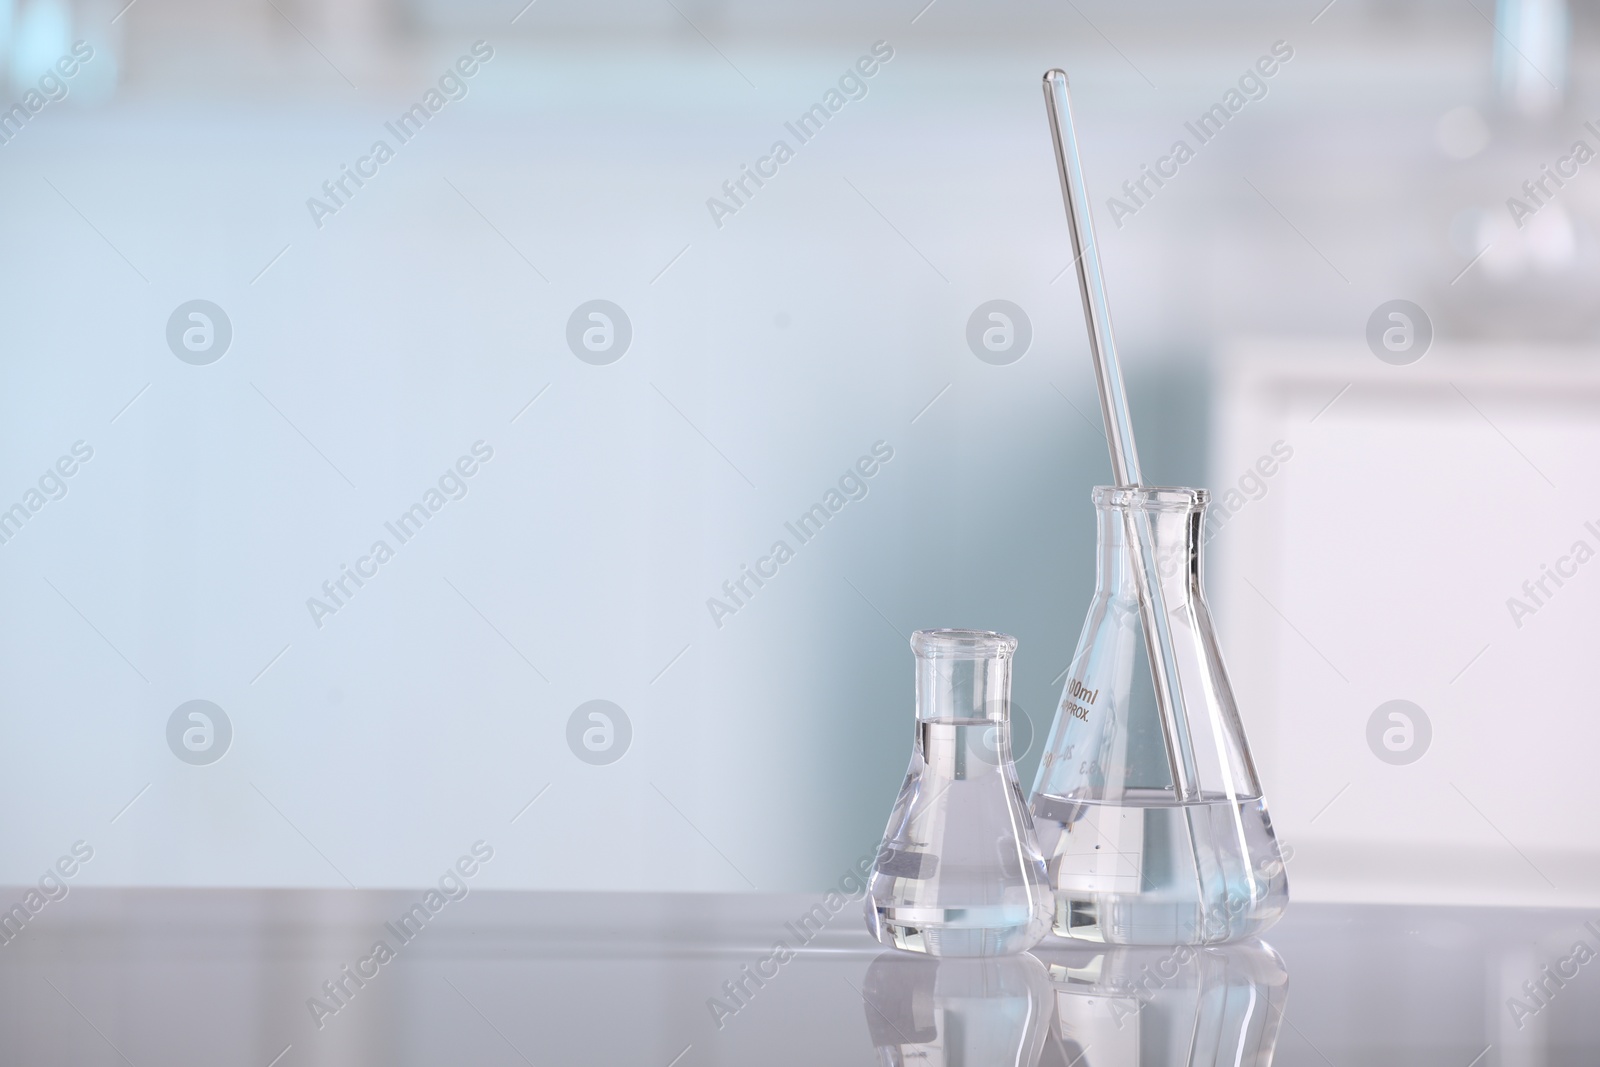 Photo of Laboratory analysis. Glass flasks and stirring rod on white table against blurred background, space for text